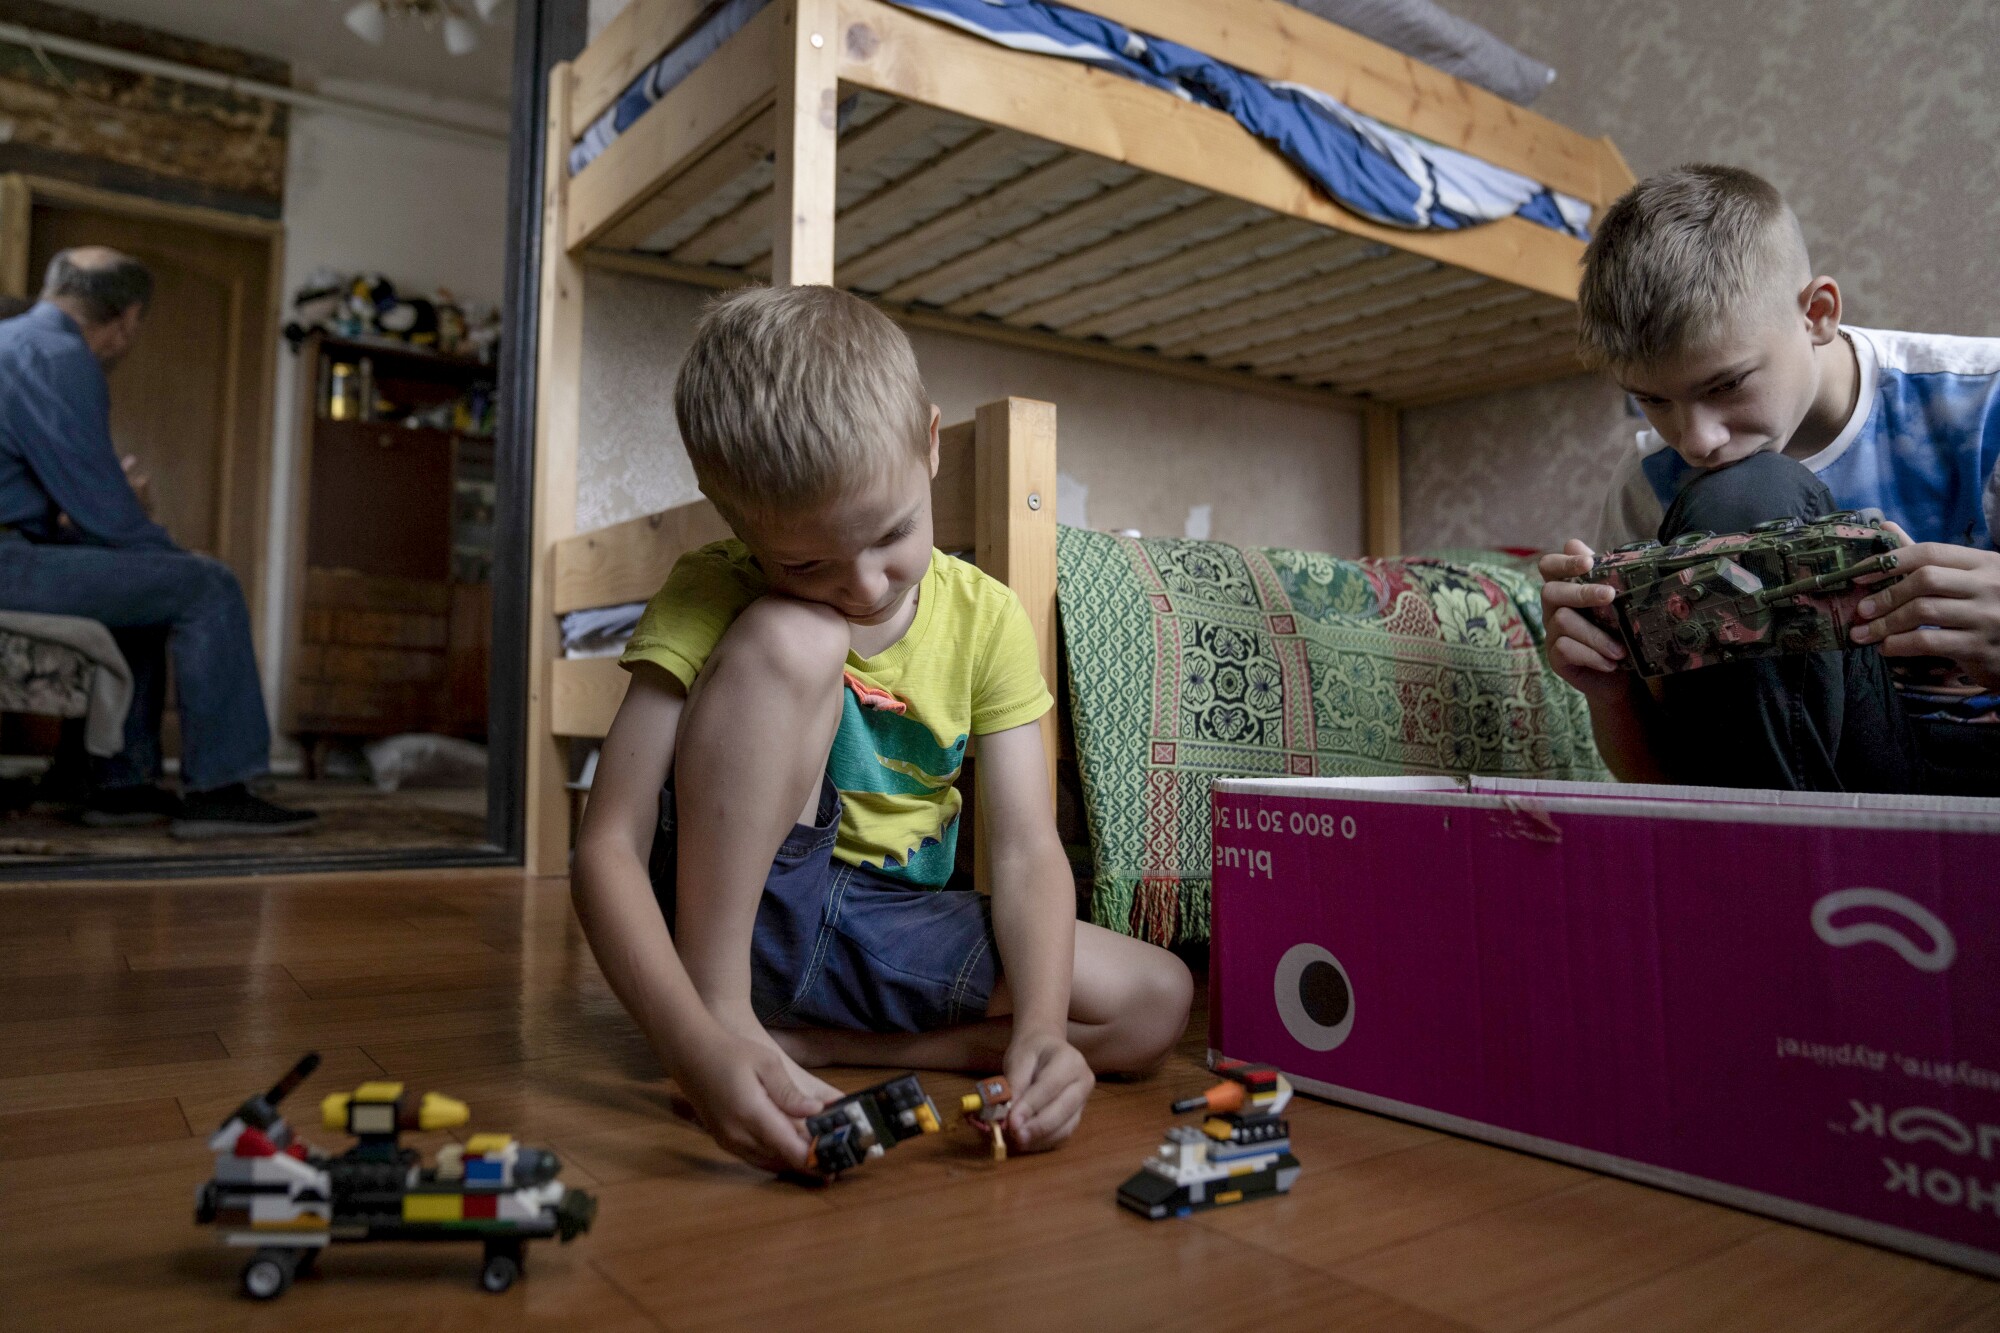 Two boys playing with toys in the room.